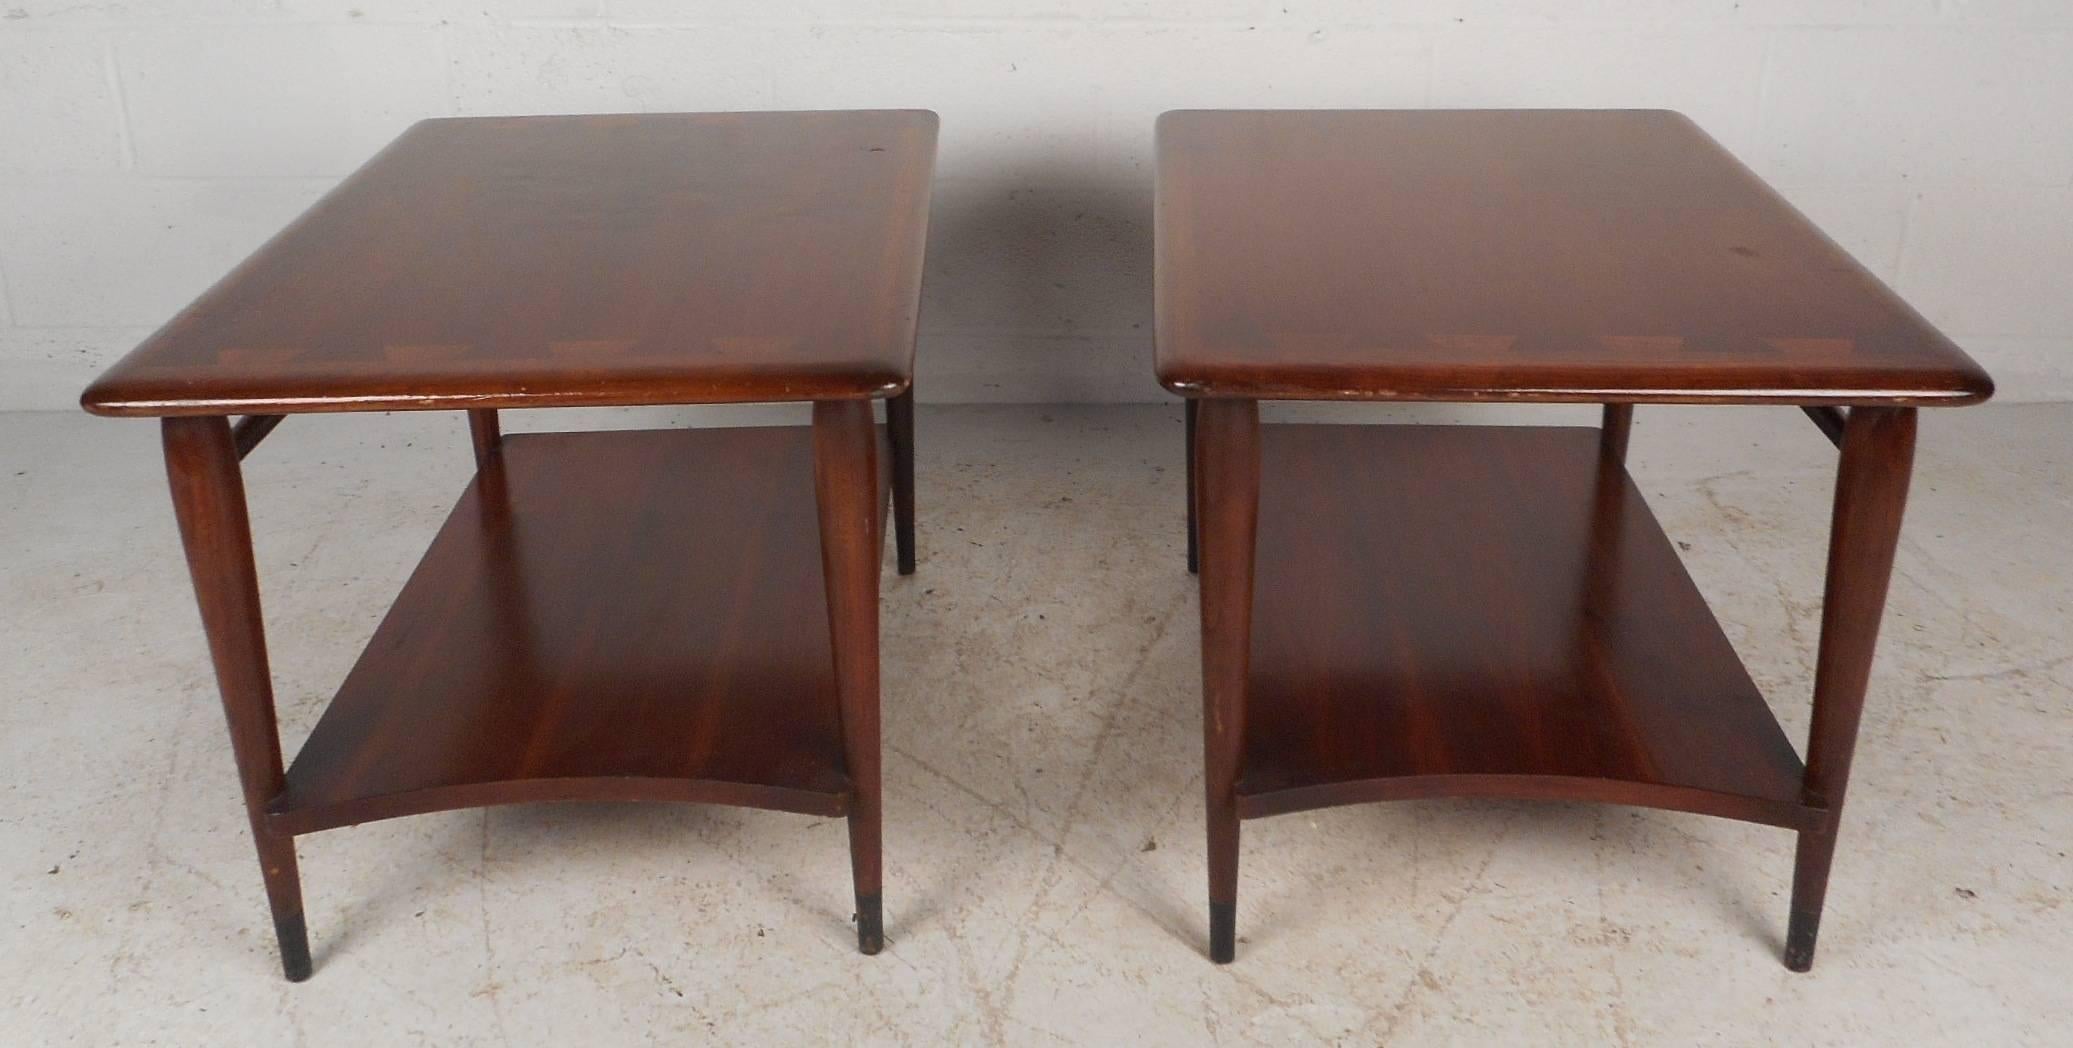 American Mid-Century Modern End Tables by Lane Furniture